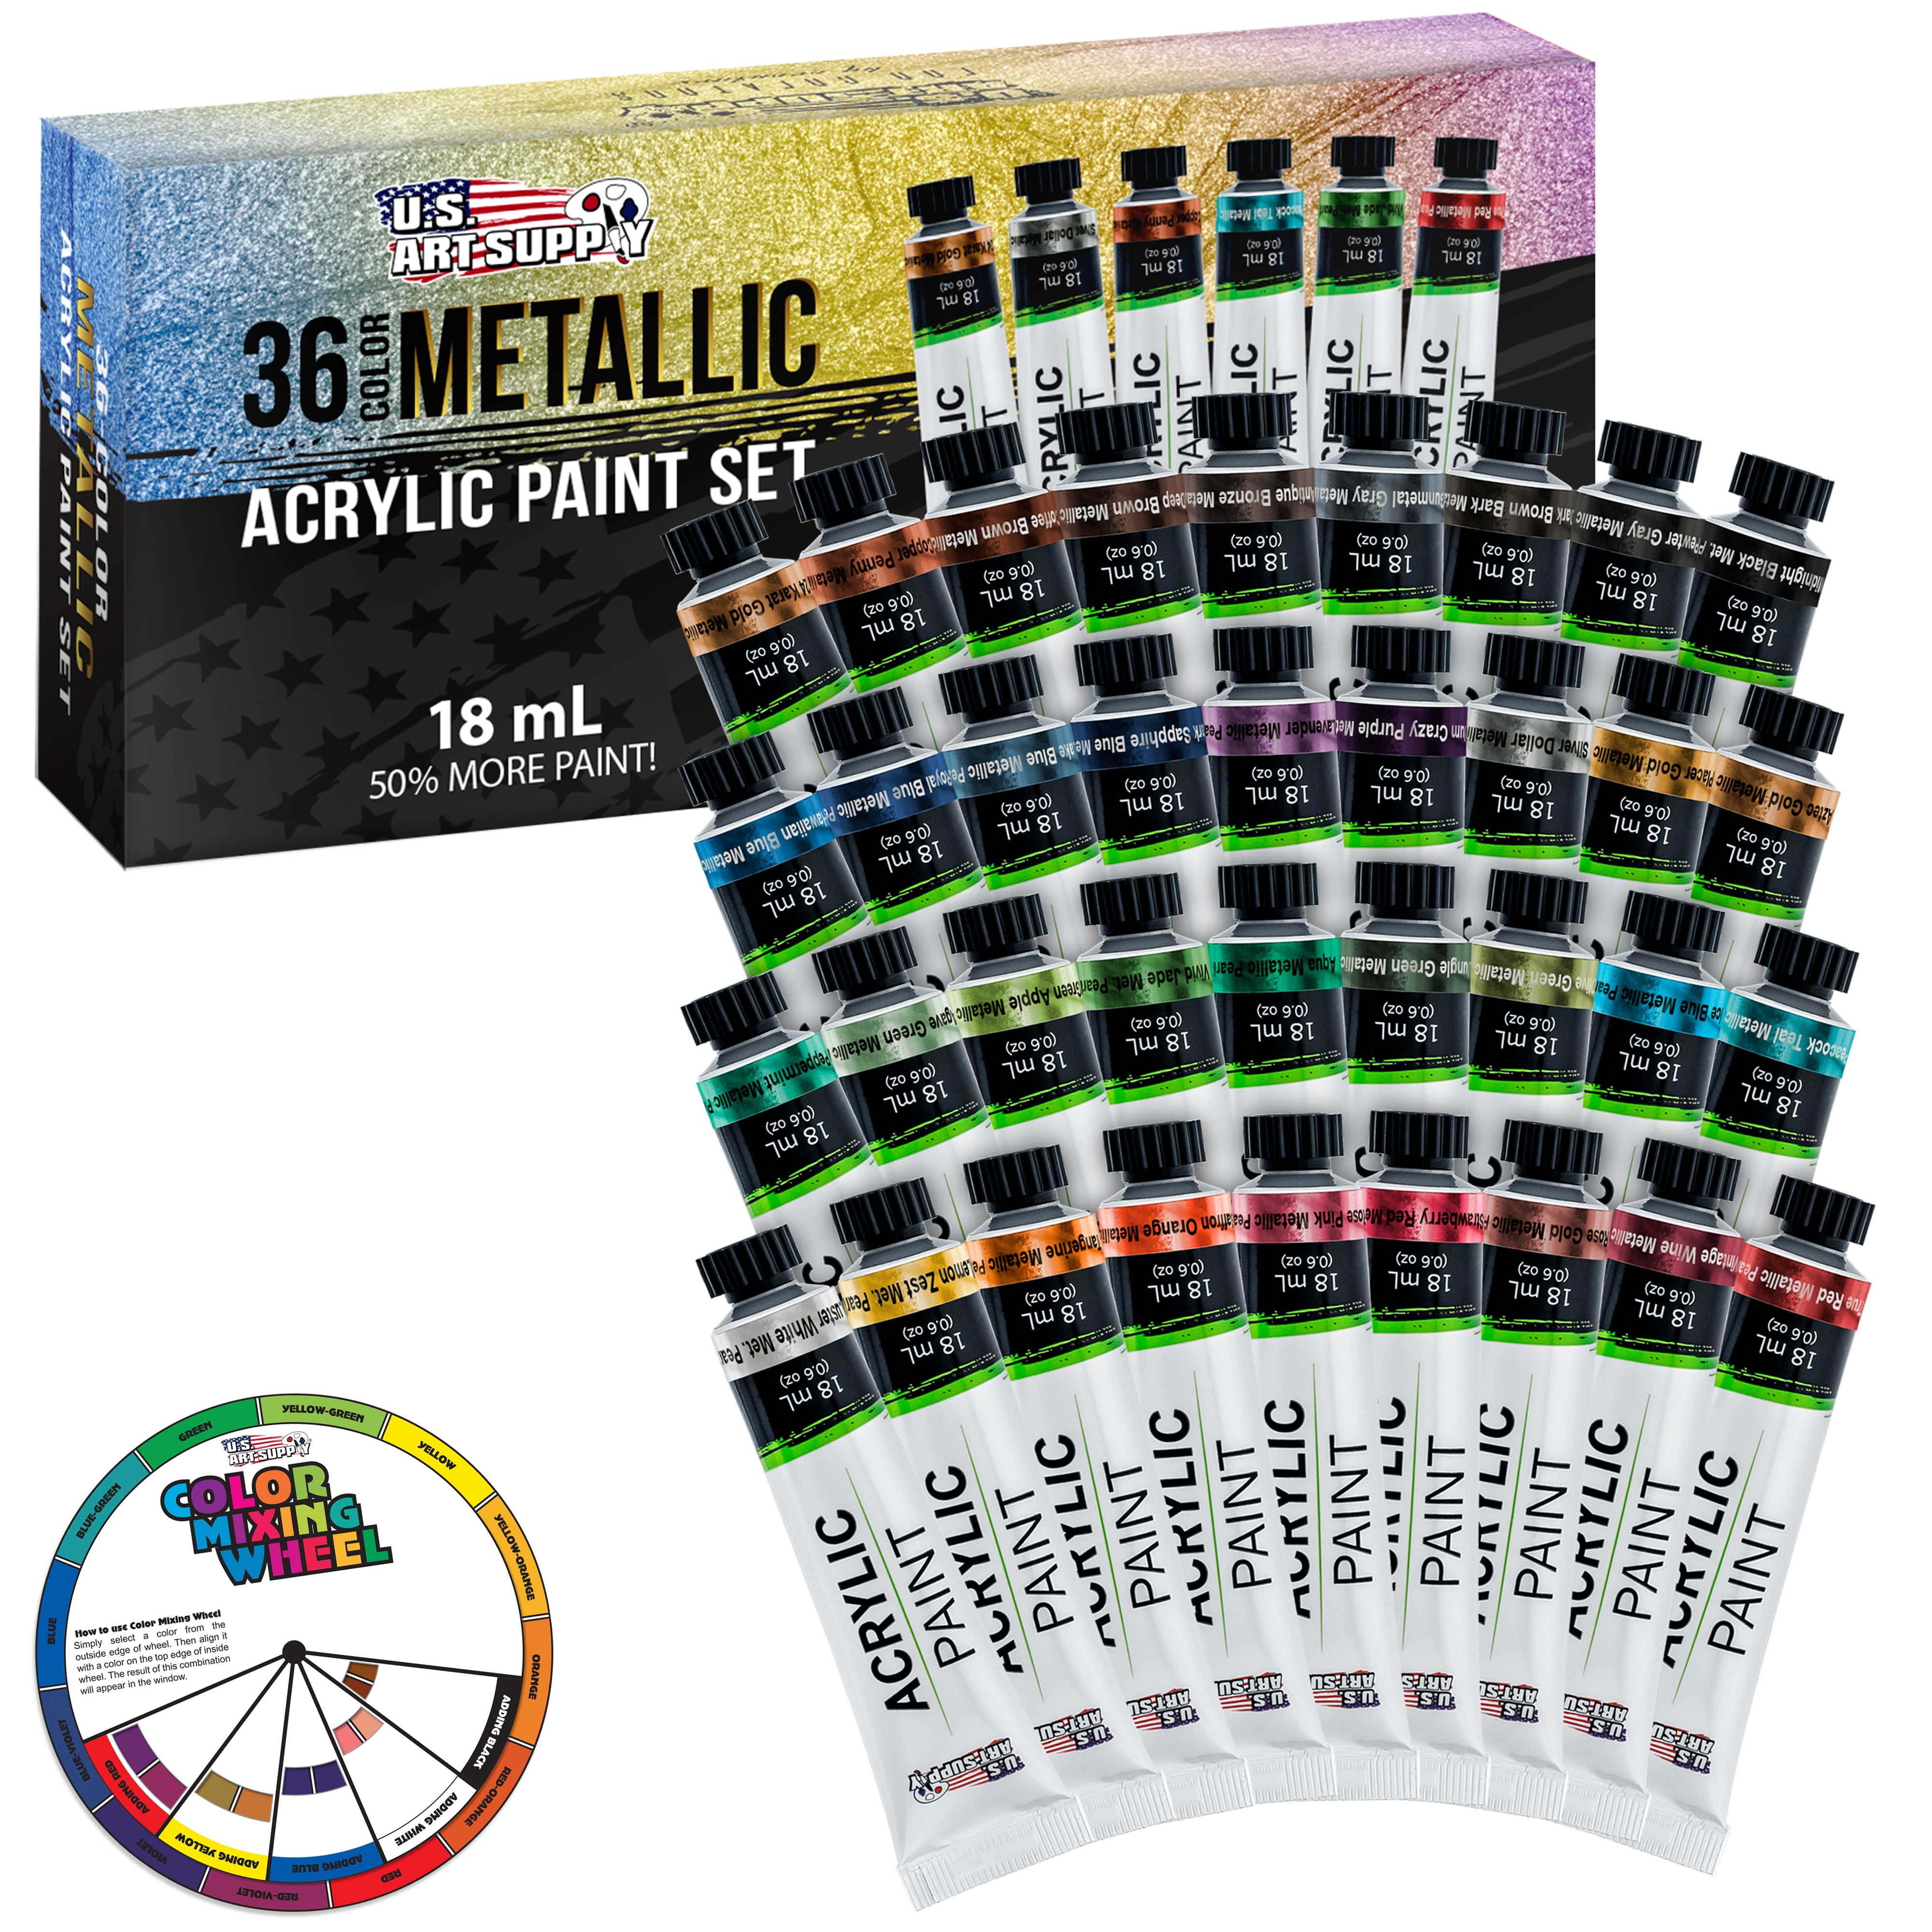 U.S. Art Supply u.s. art supply professional 36 color set of metallic  acrylic paint, large 18ml tubes - rich vivid pearl colors for artists